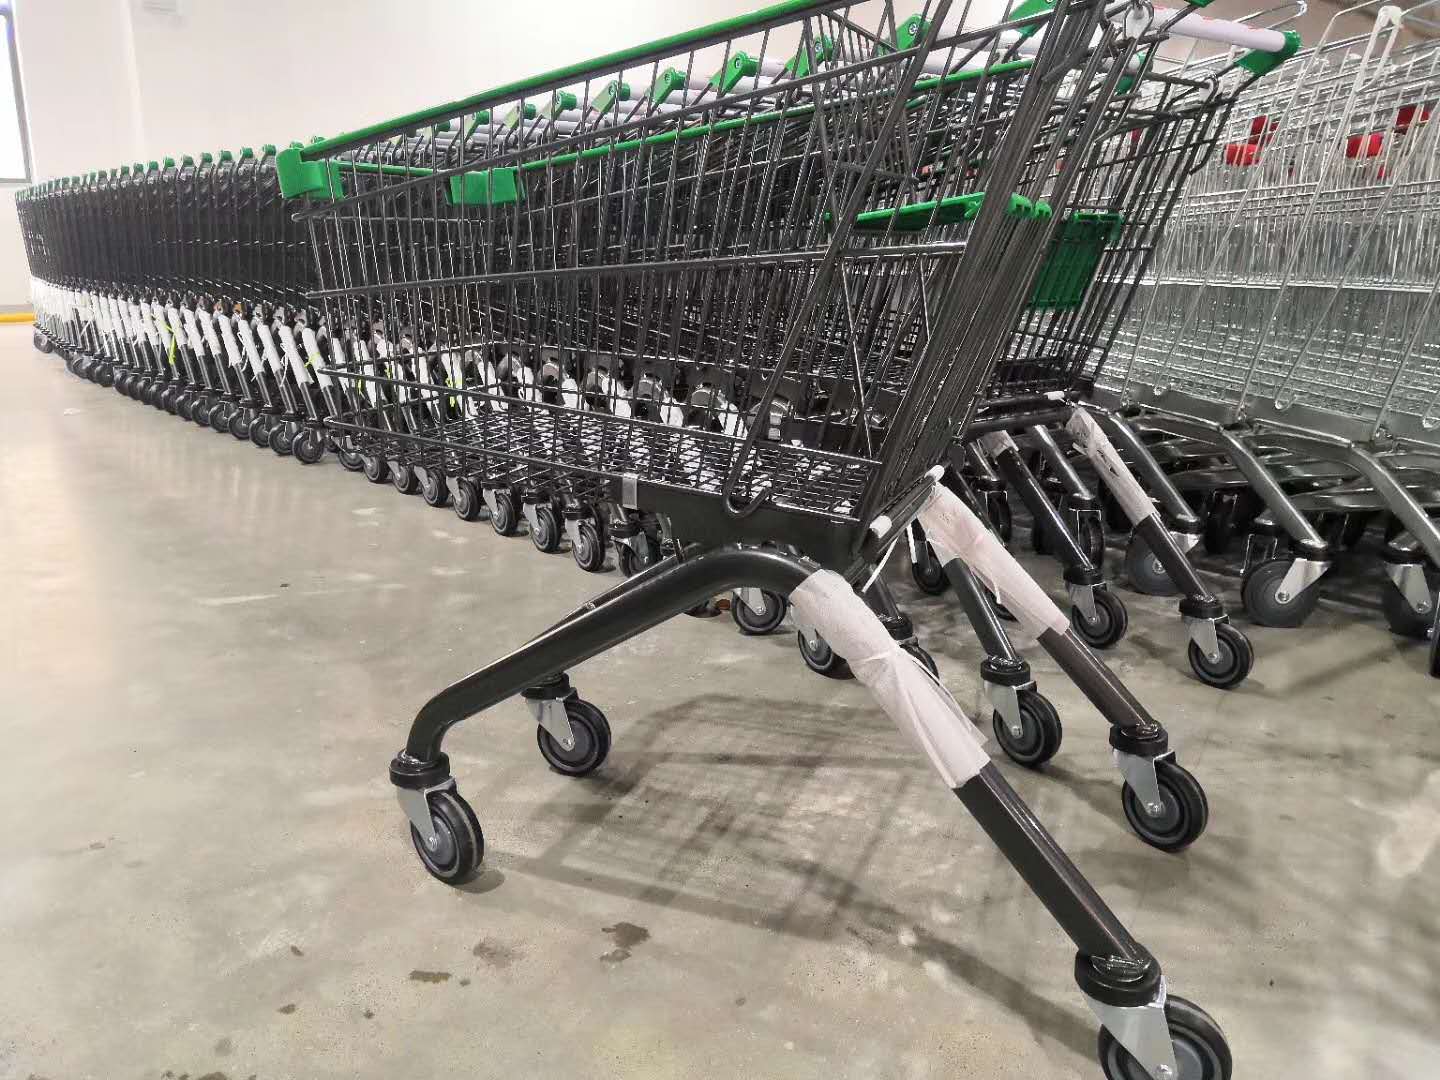 How to choose a Shopping cart?